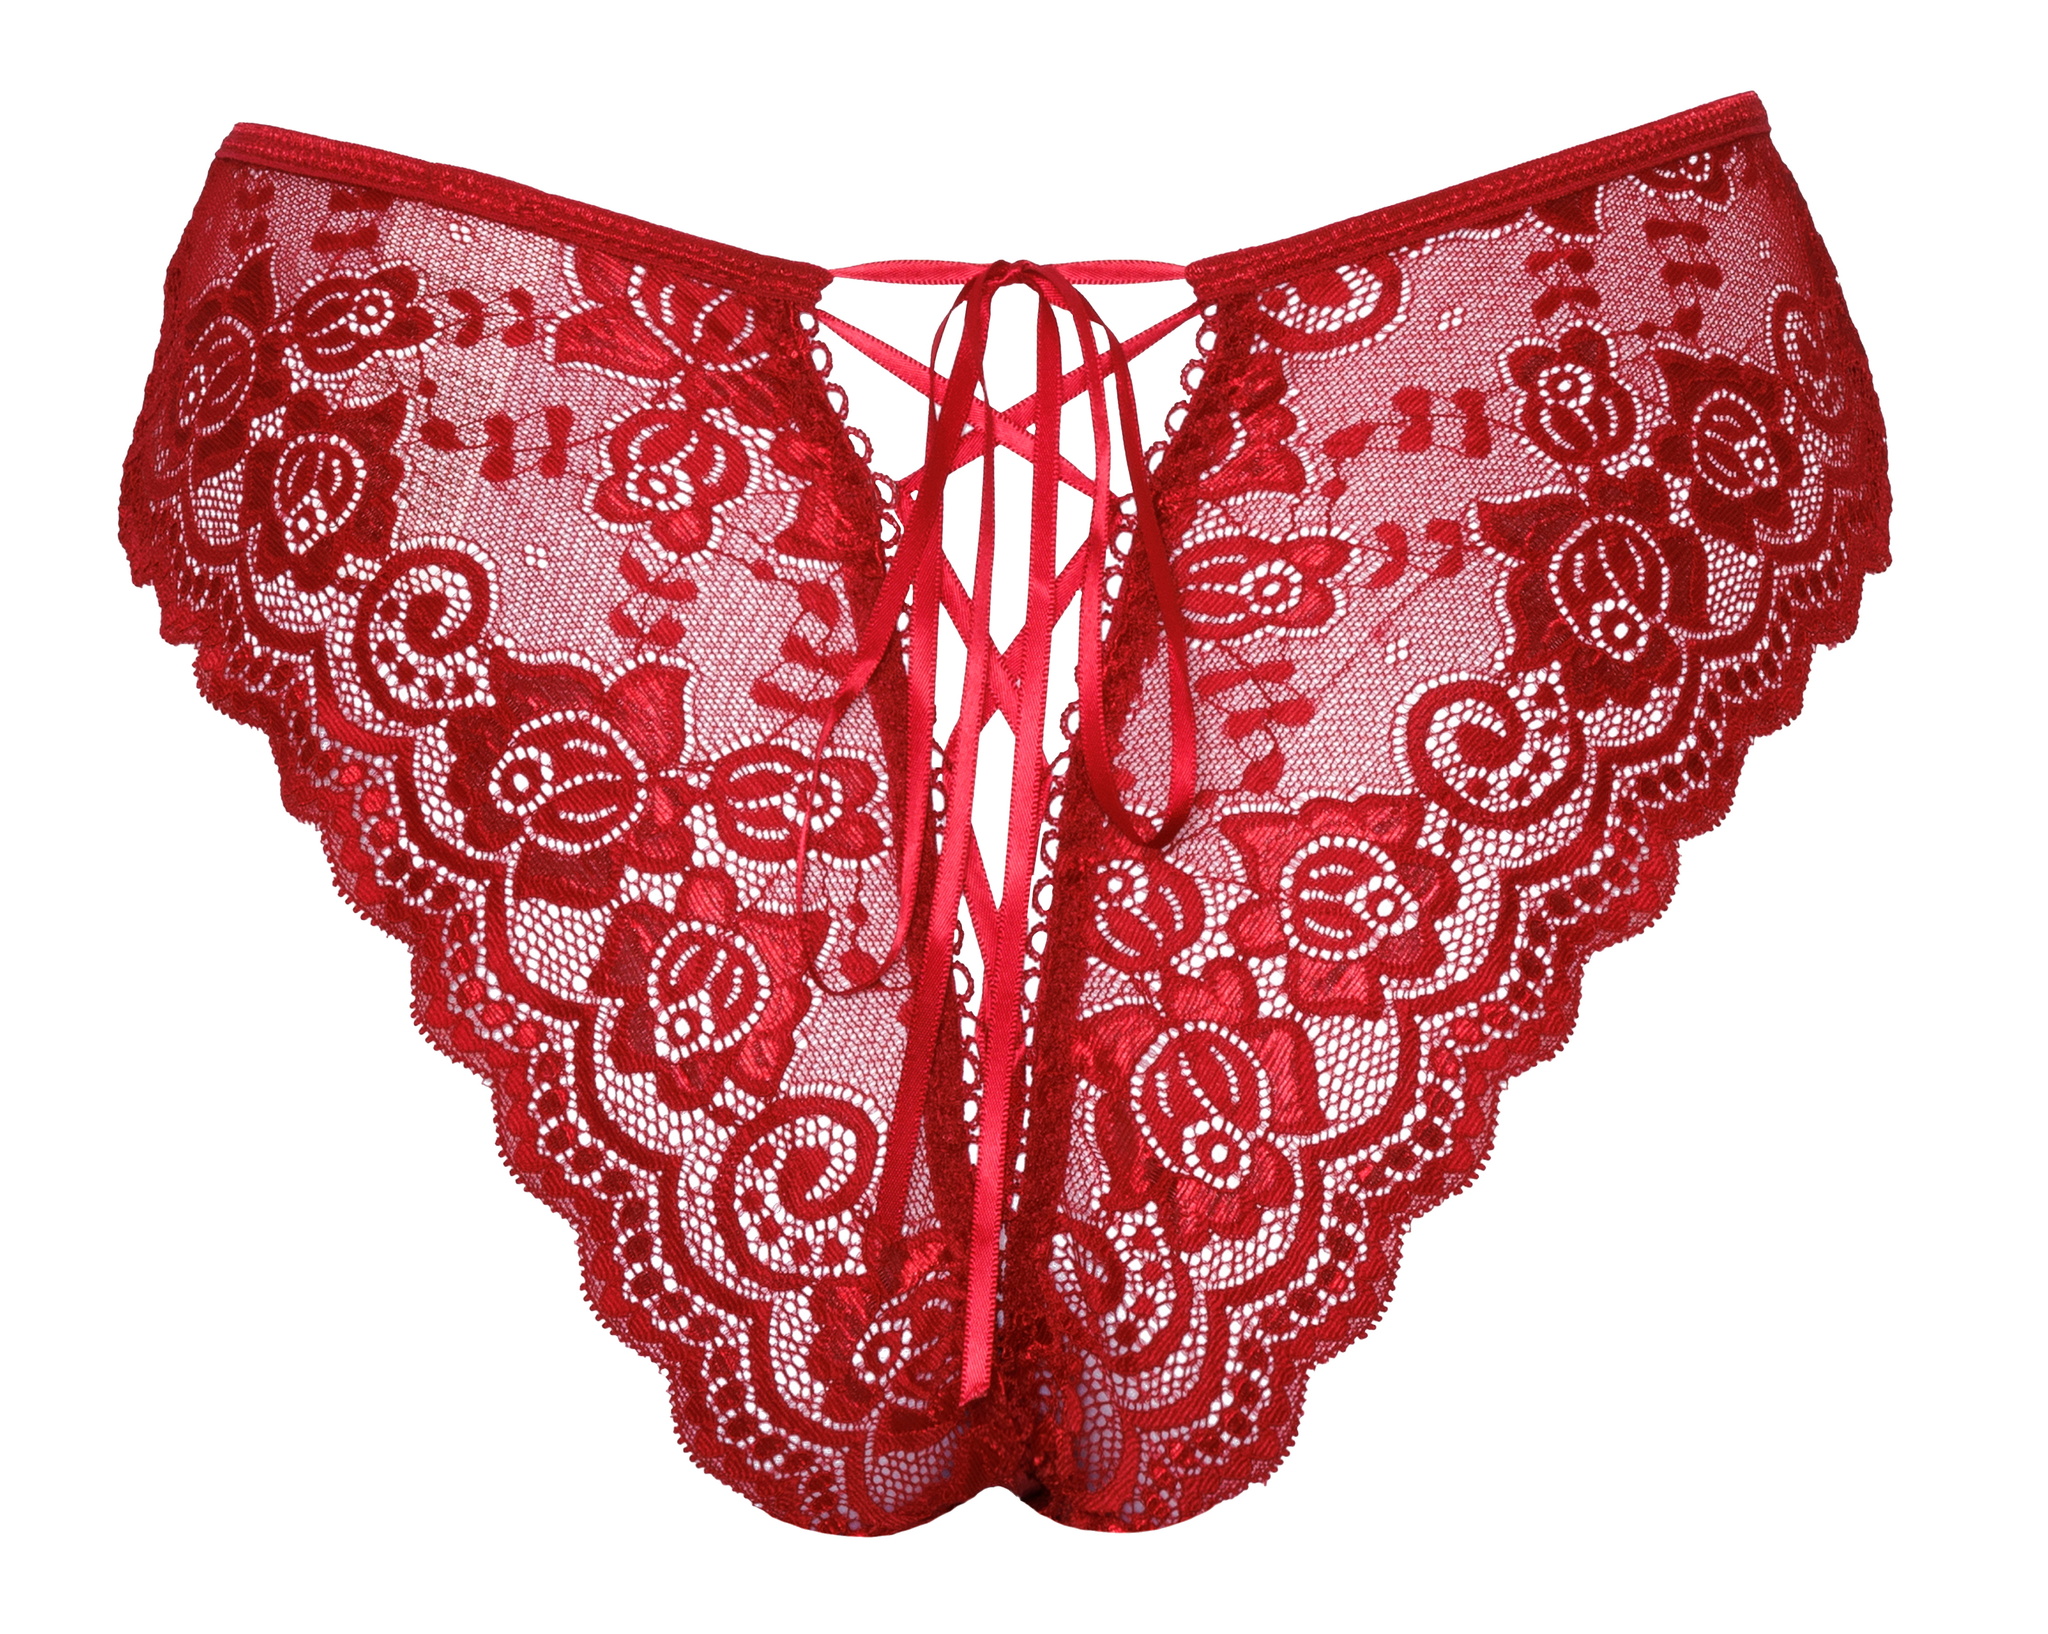 Crotchless Panty Red Small